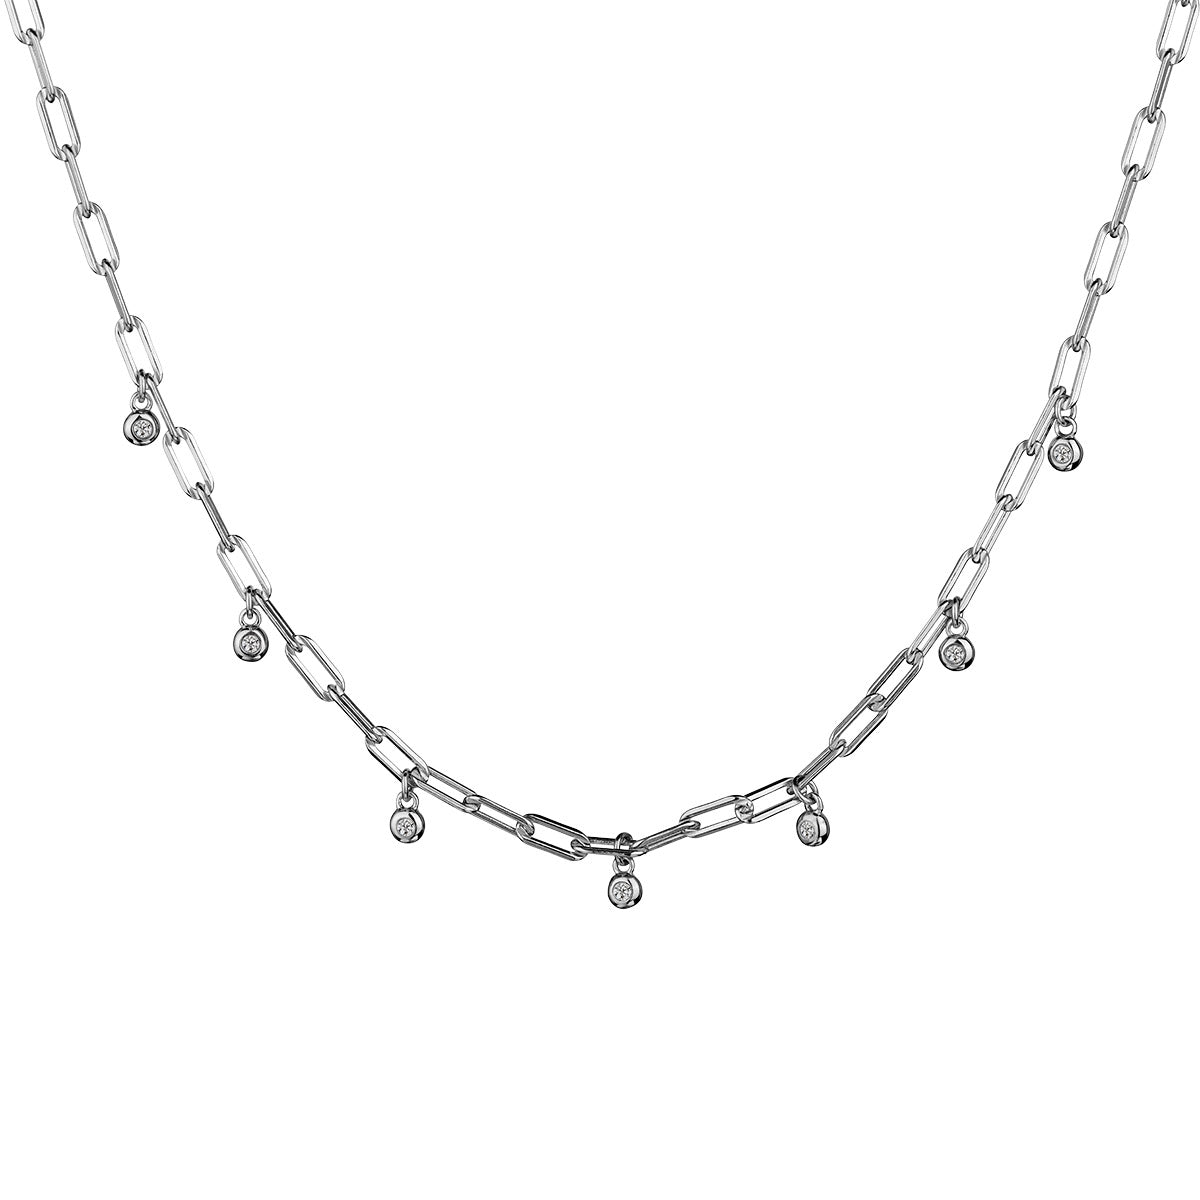 .07 Carat of Diamonds Necklace, Silver...................NOW